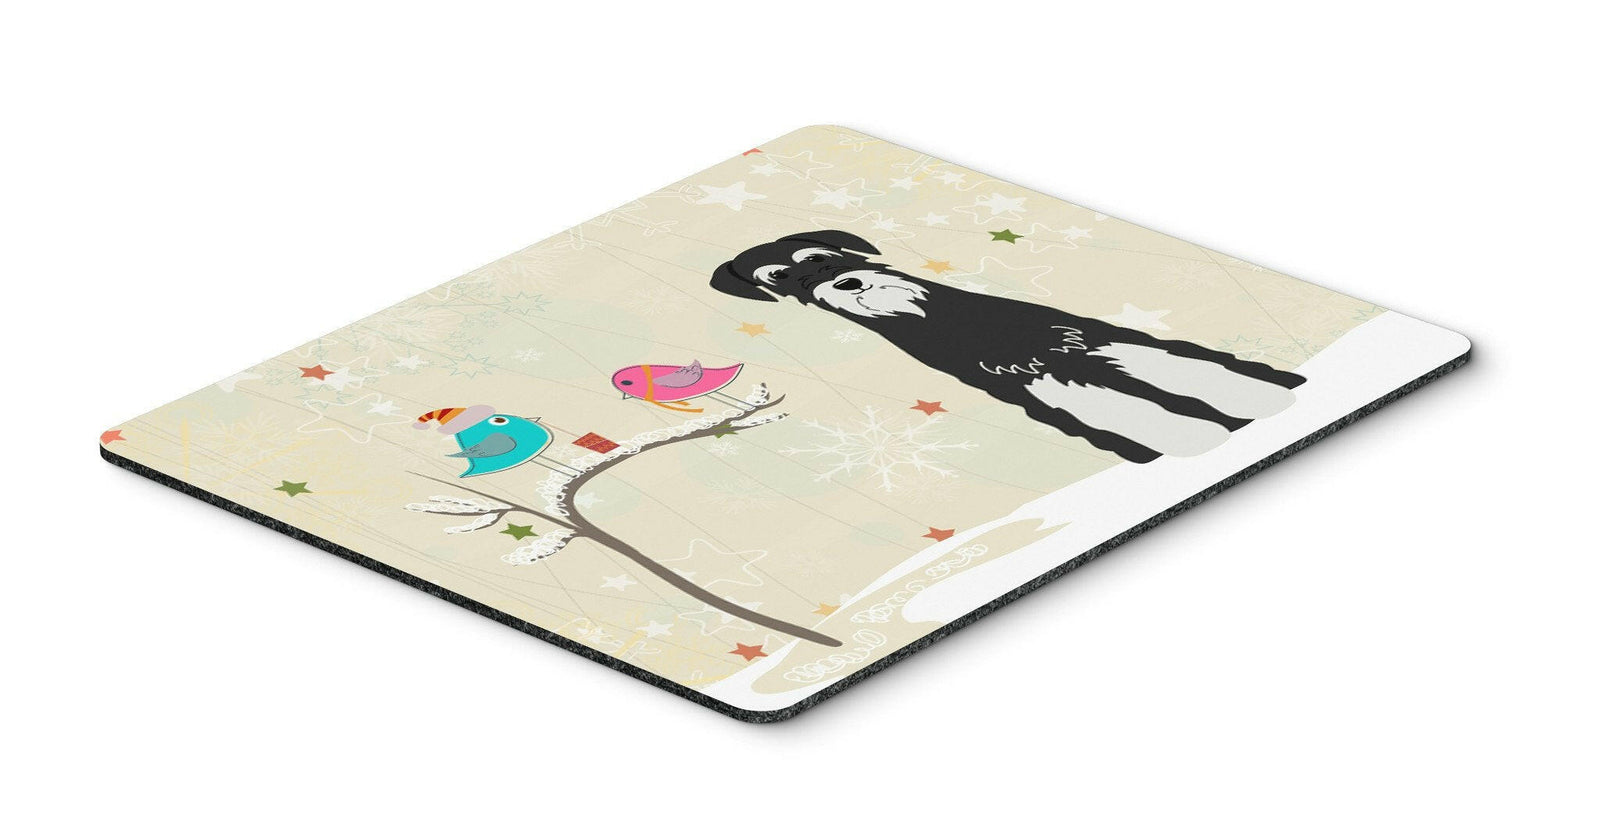 Christmas Presents between Friends Standard Schnauzer Salt and Pepper Mouse Pad, Hot Pad or Trivet BB2505MP by Caroline's Treasures